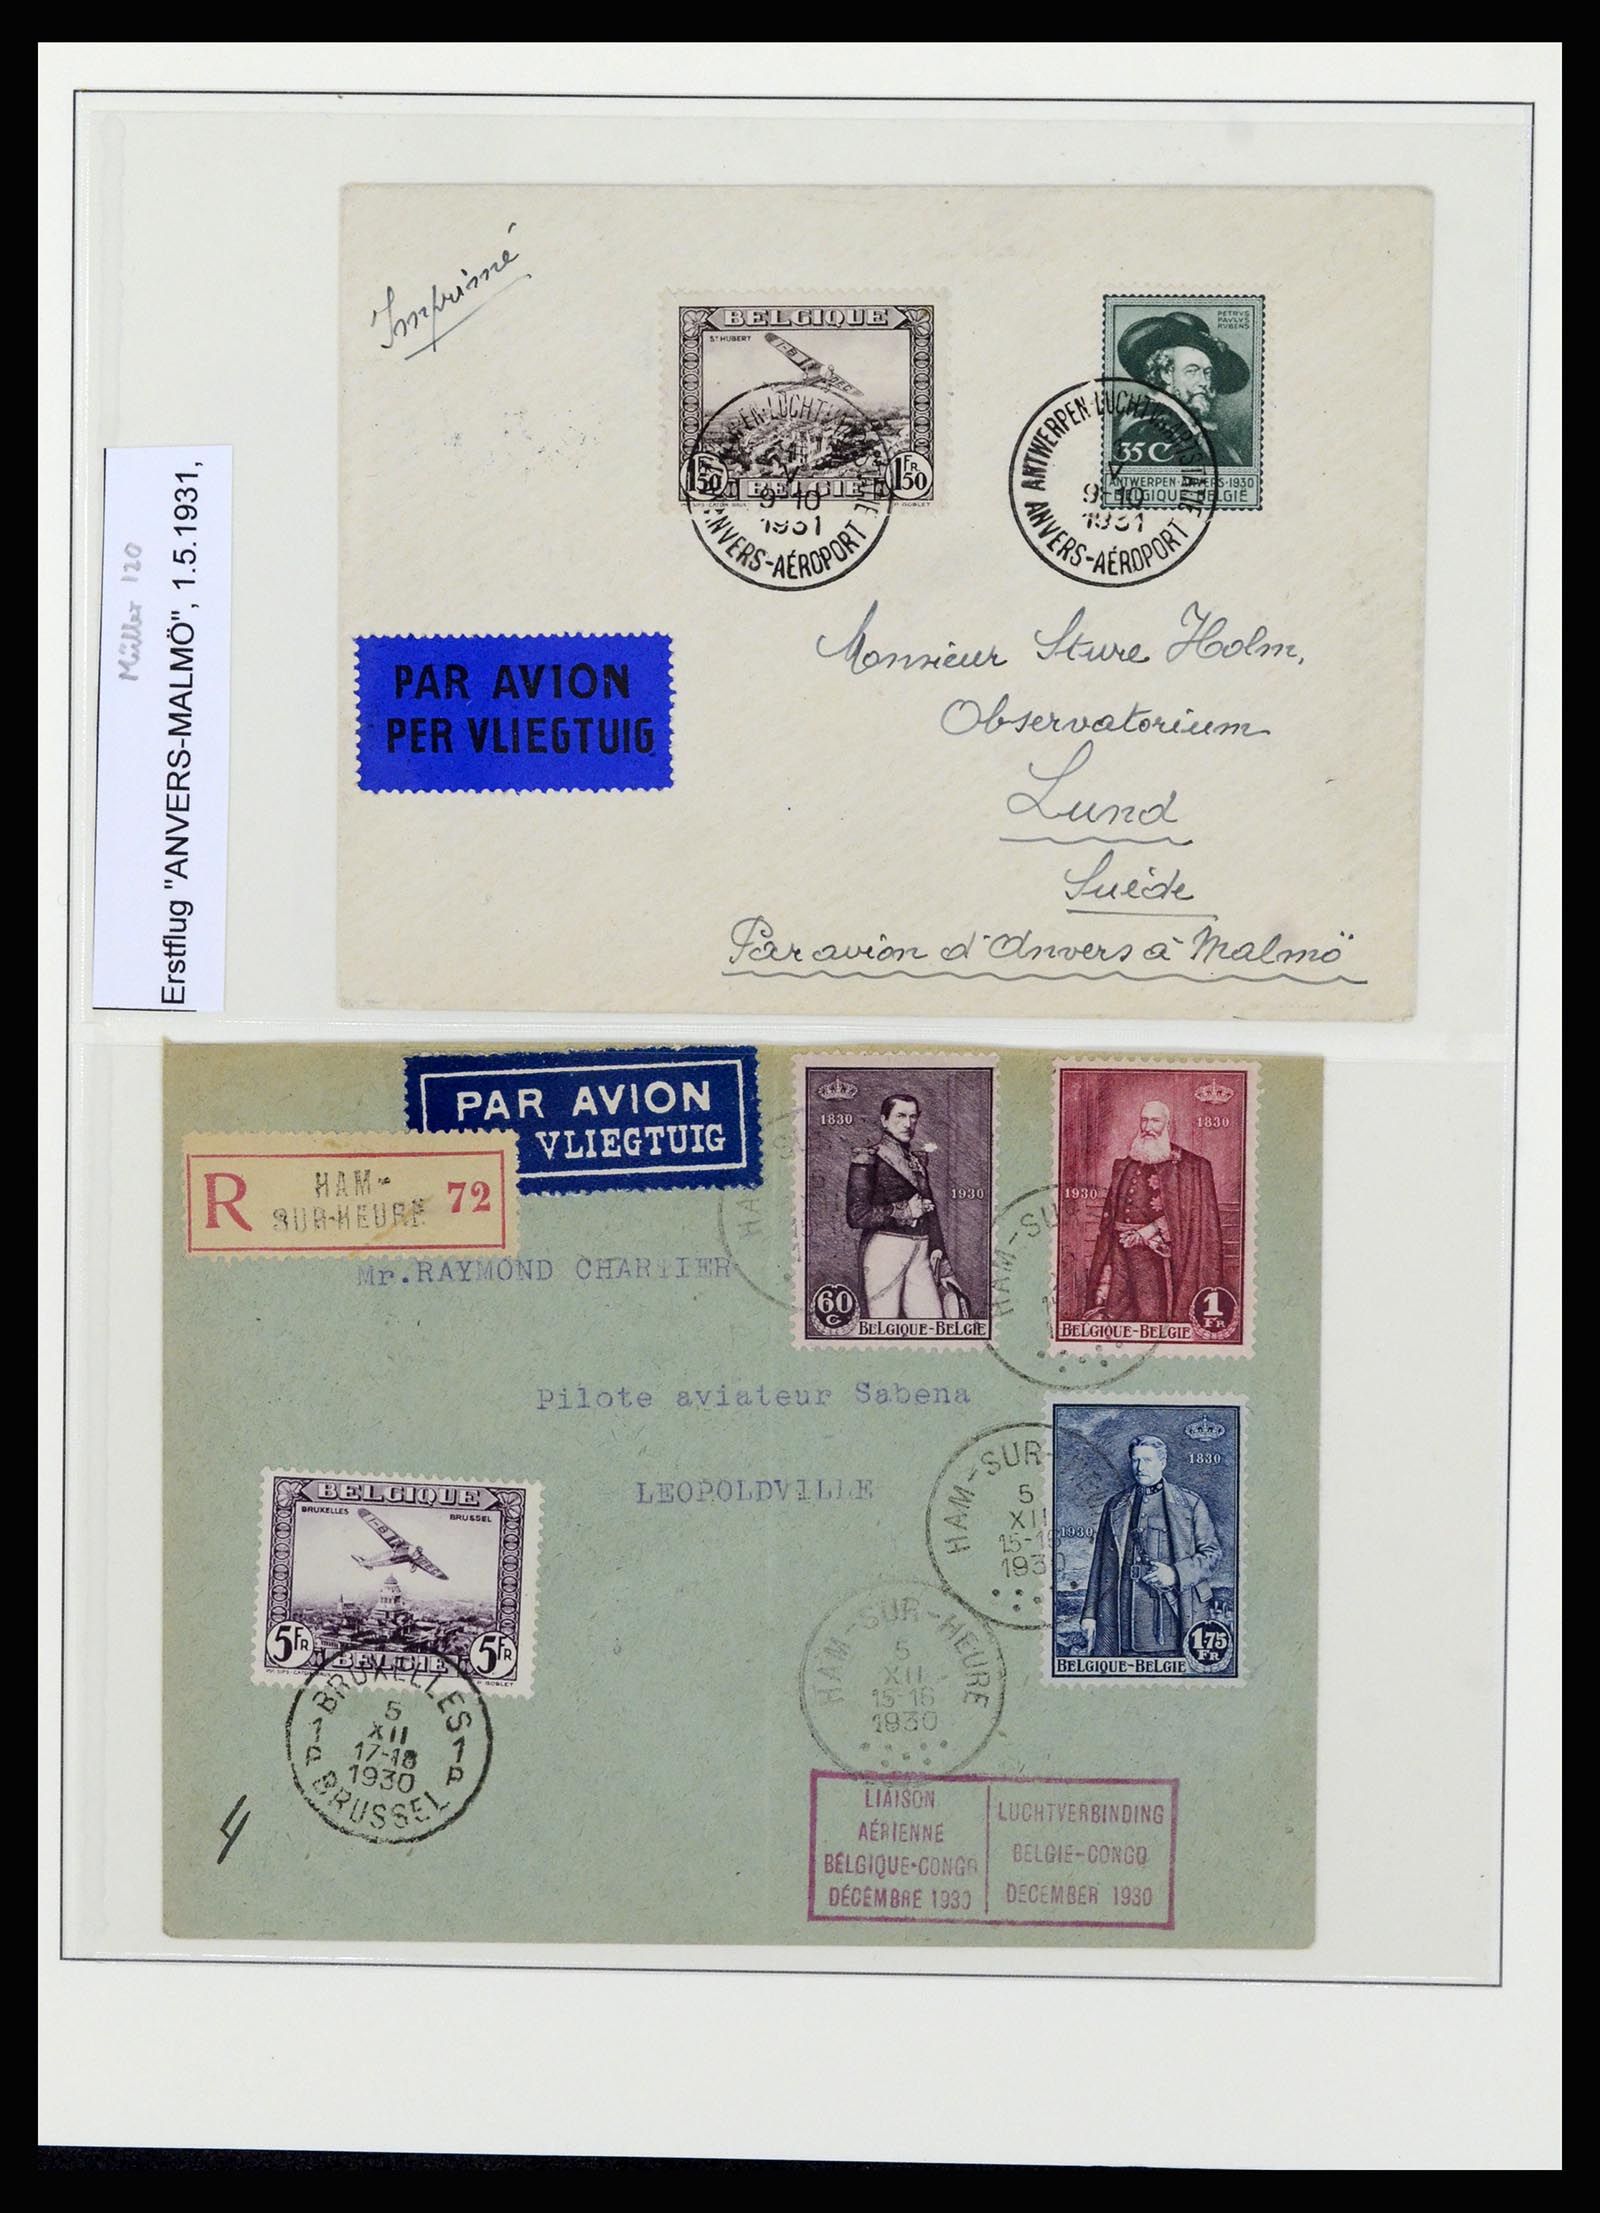 37073 005 - Stamp collection 37073 Belgium covers 1933-1954.